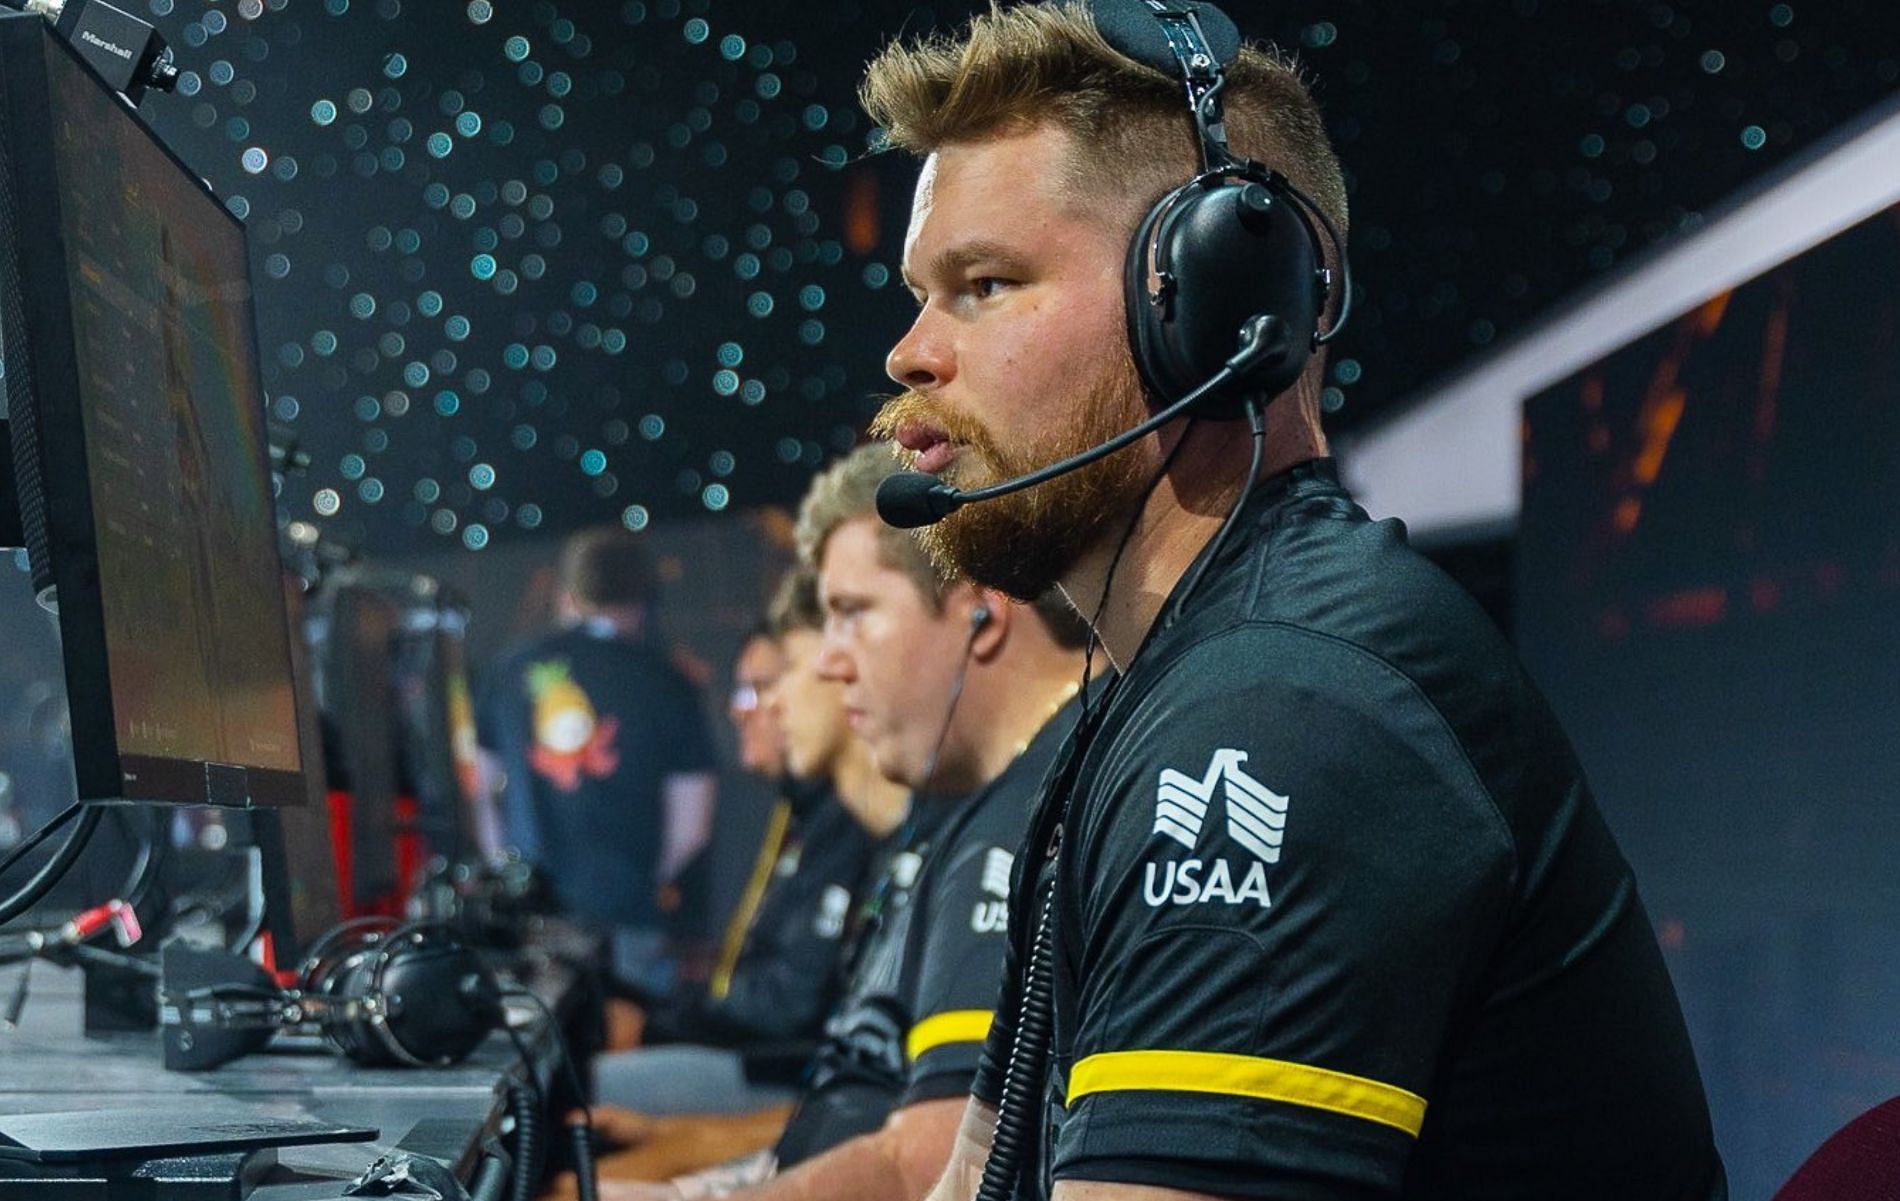 Crimsix responds after disastrous performance in CDL Champs (Image via Create_Supply)